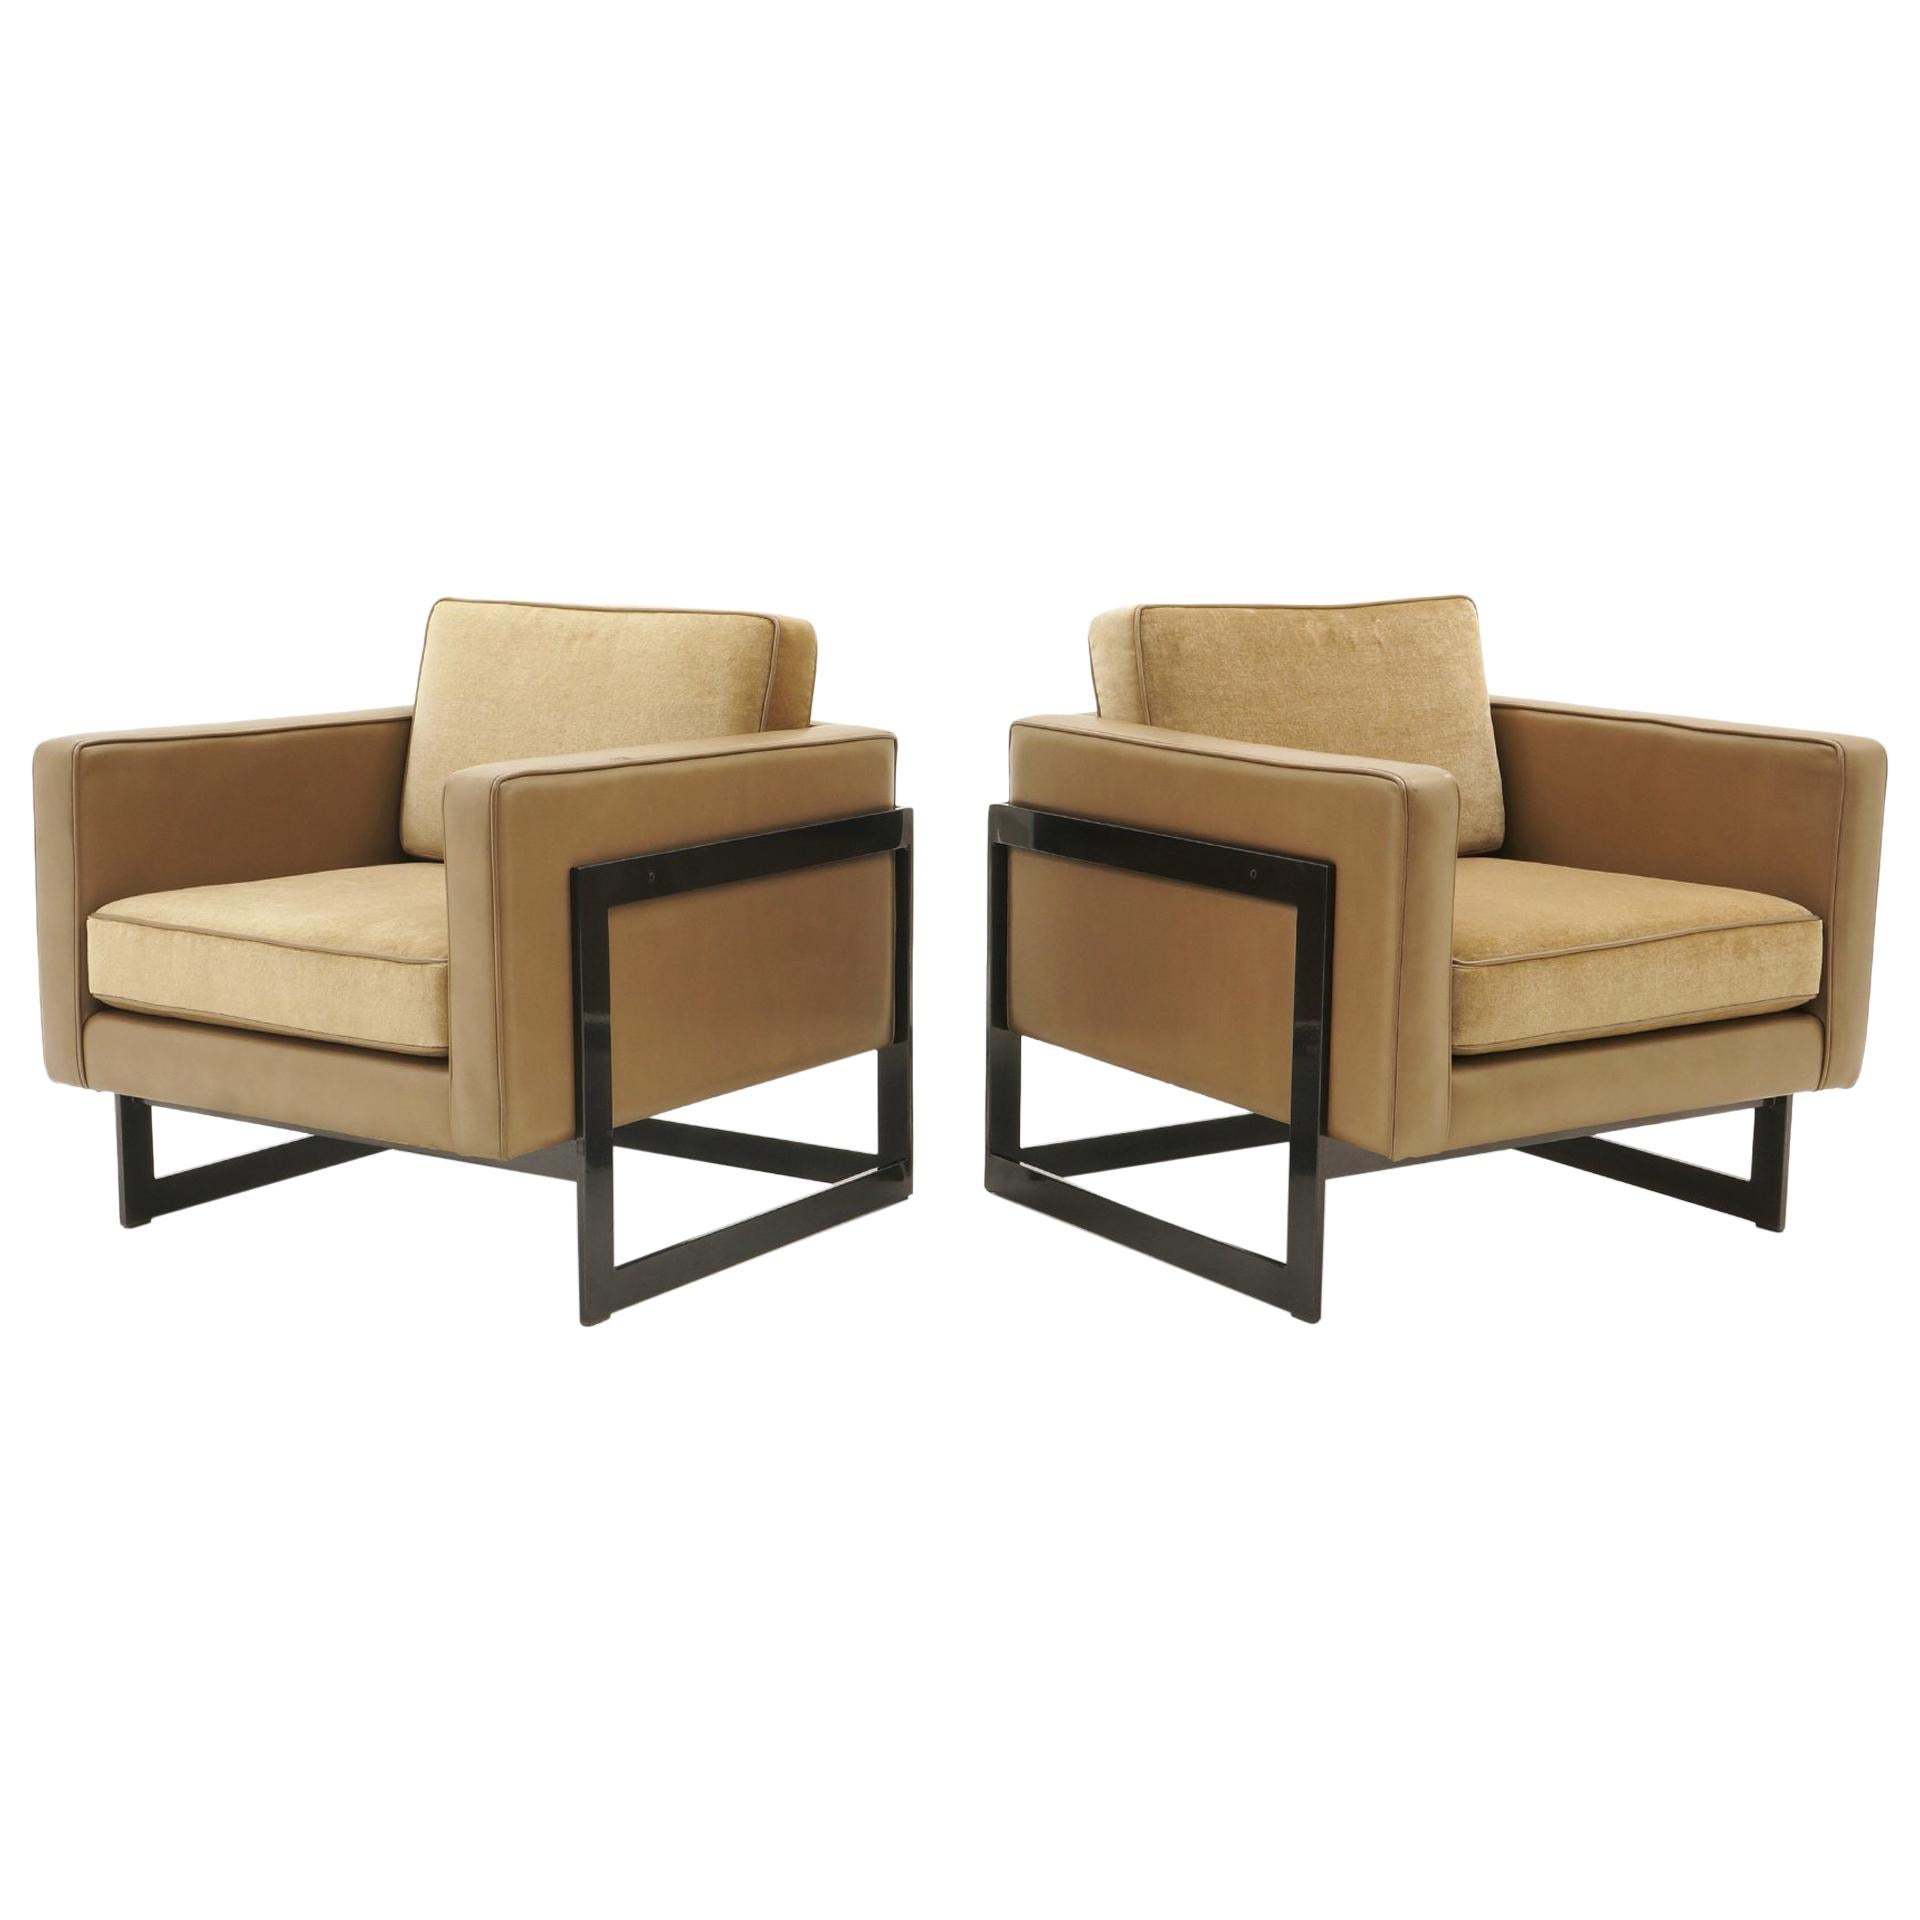 Pair Lounge Chairs by Milo Baughman, Camel / Tan Mohair and Leather, Beautiful